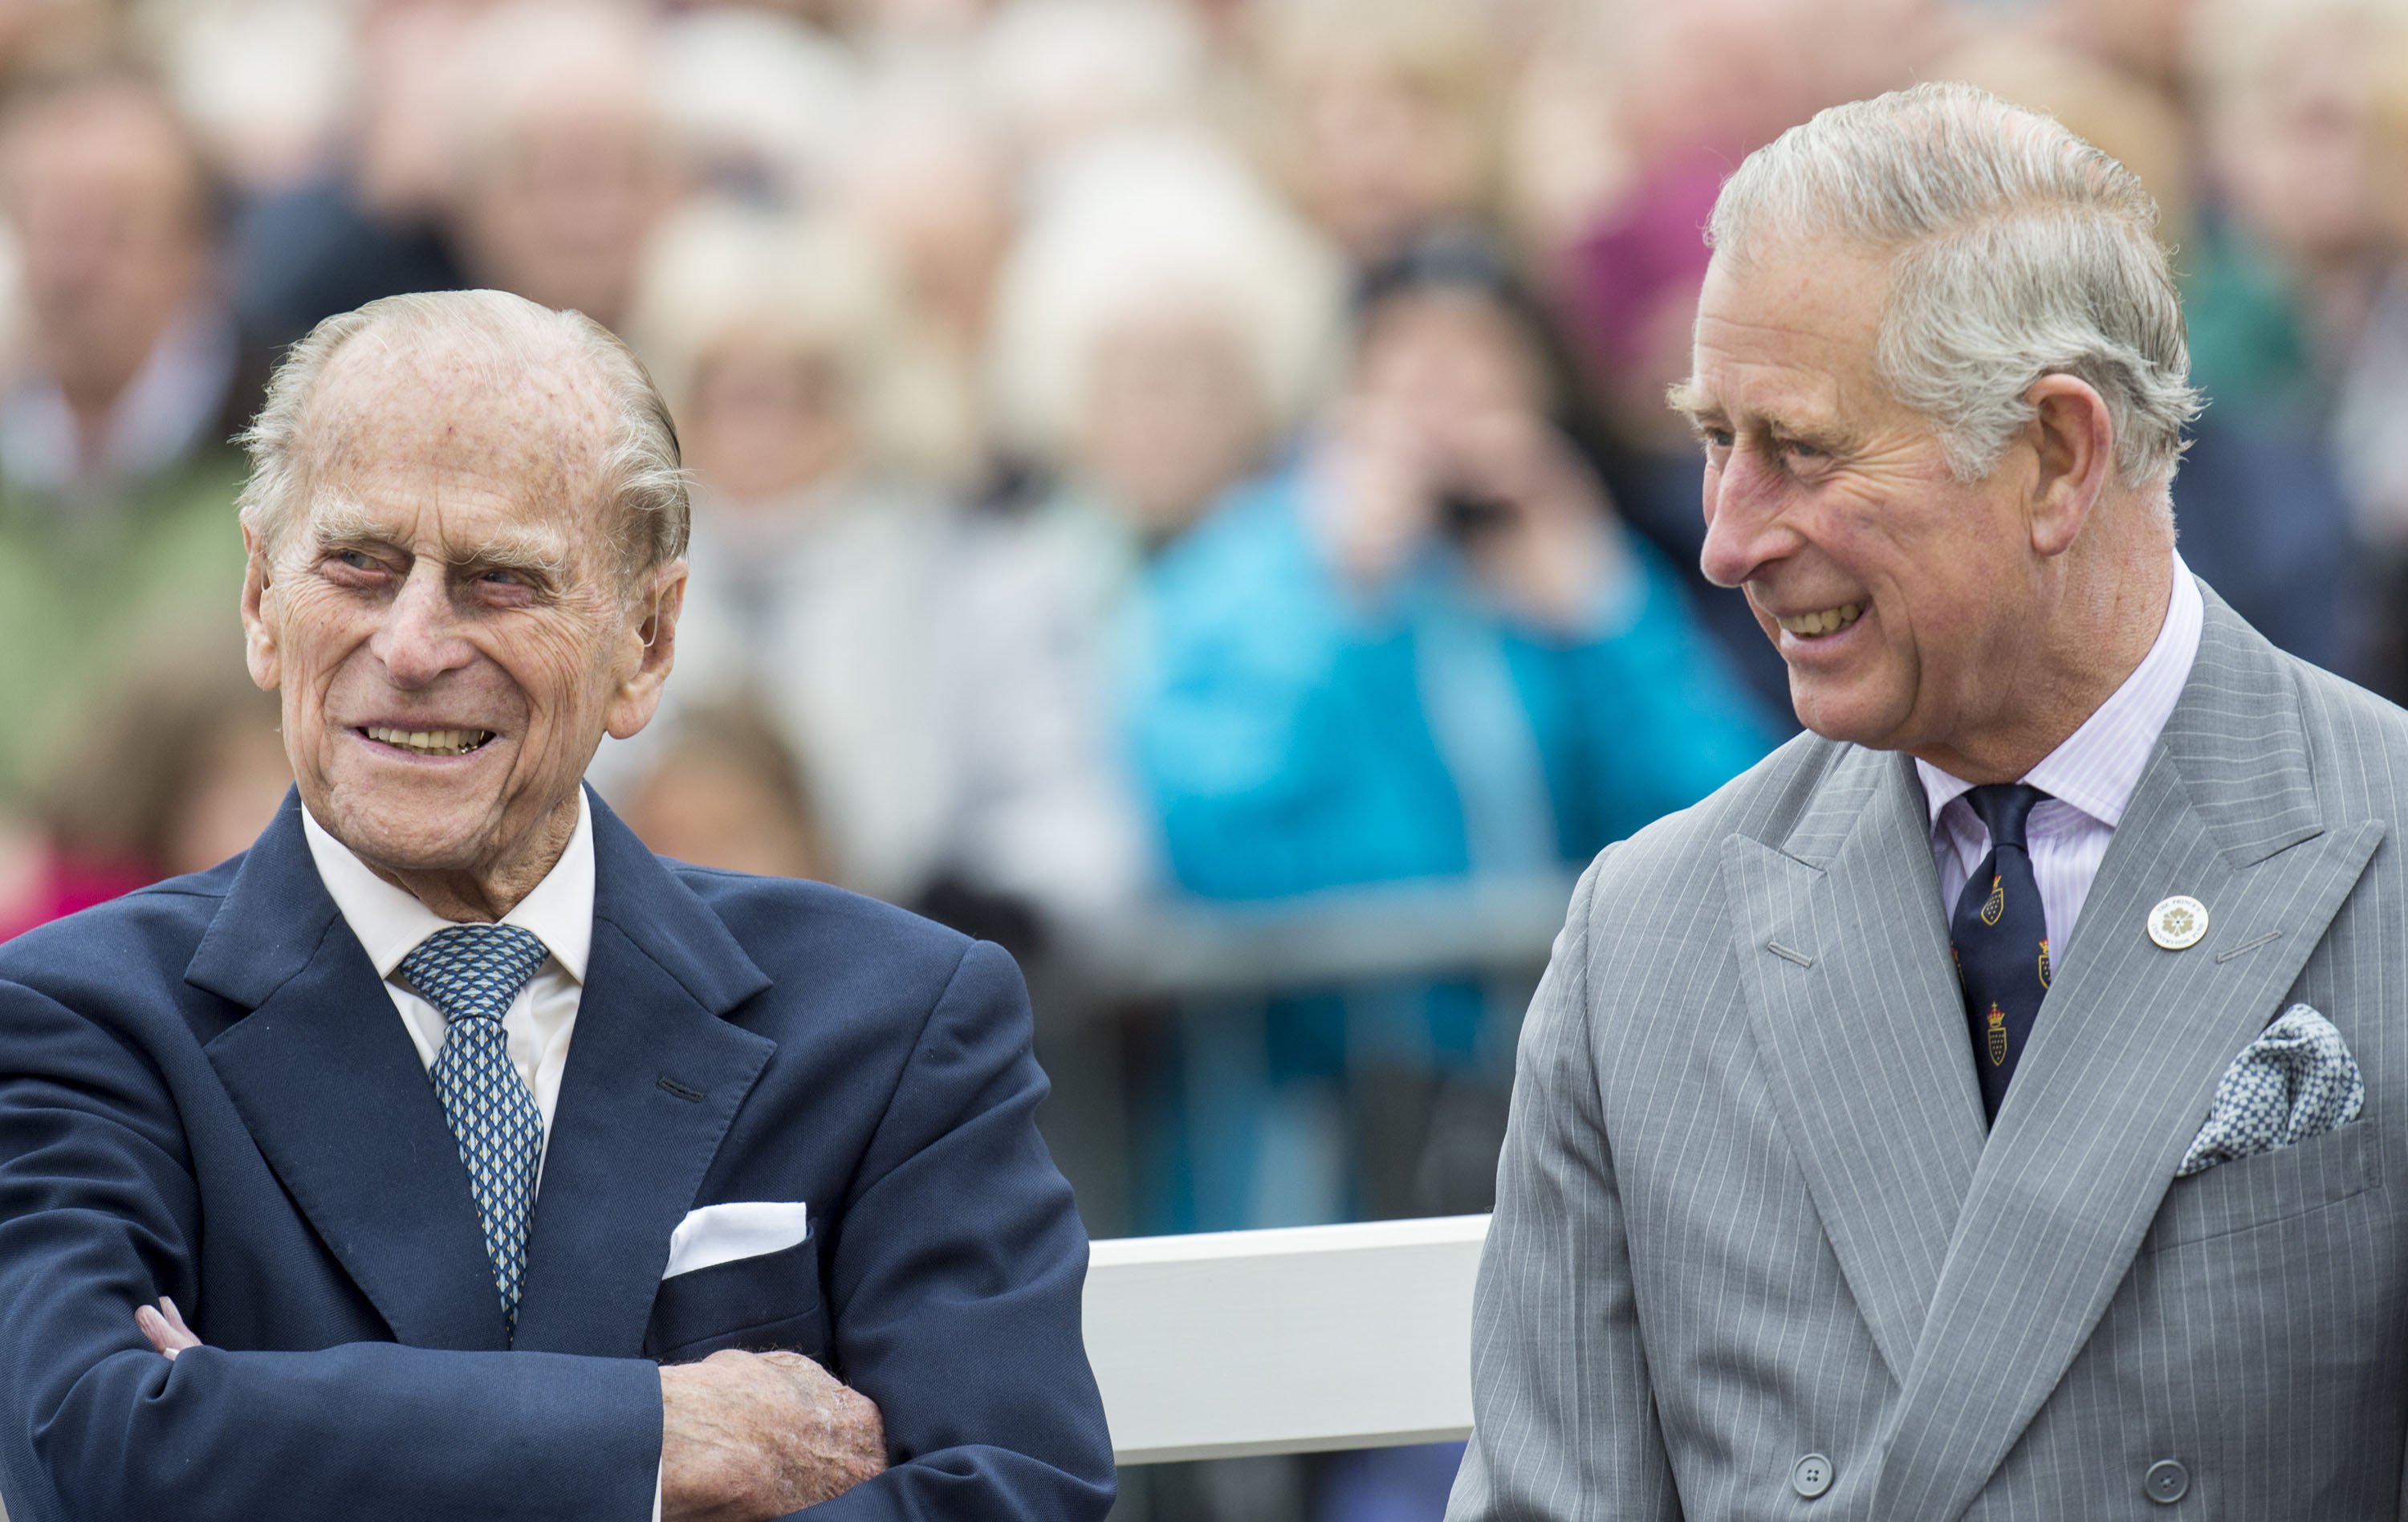 Prince Philip and Prince Charles attend the unveiling of a statue of Queen Elizabeth The Queen Mother during a visit to Poundbury on October 27, 2016 in Poundbury, Dorset | Photo: Getty Images